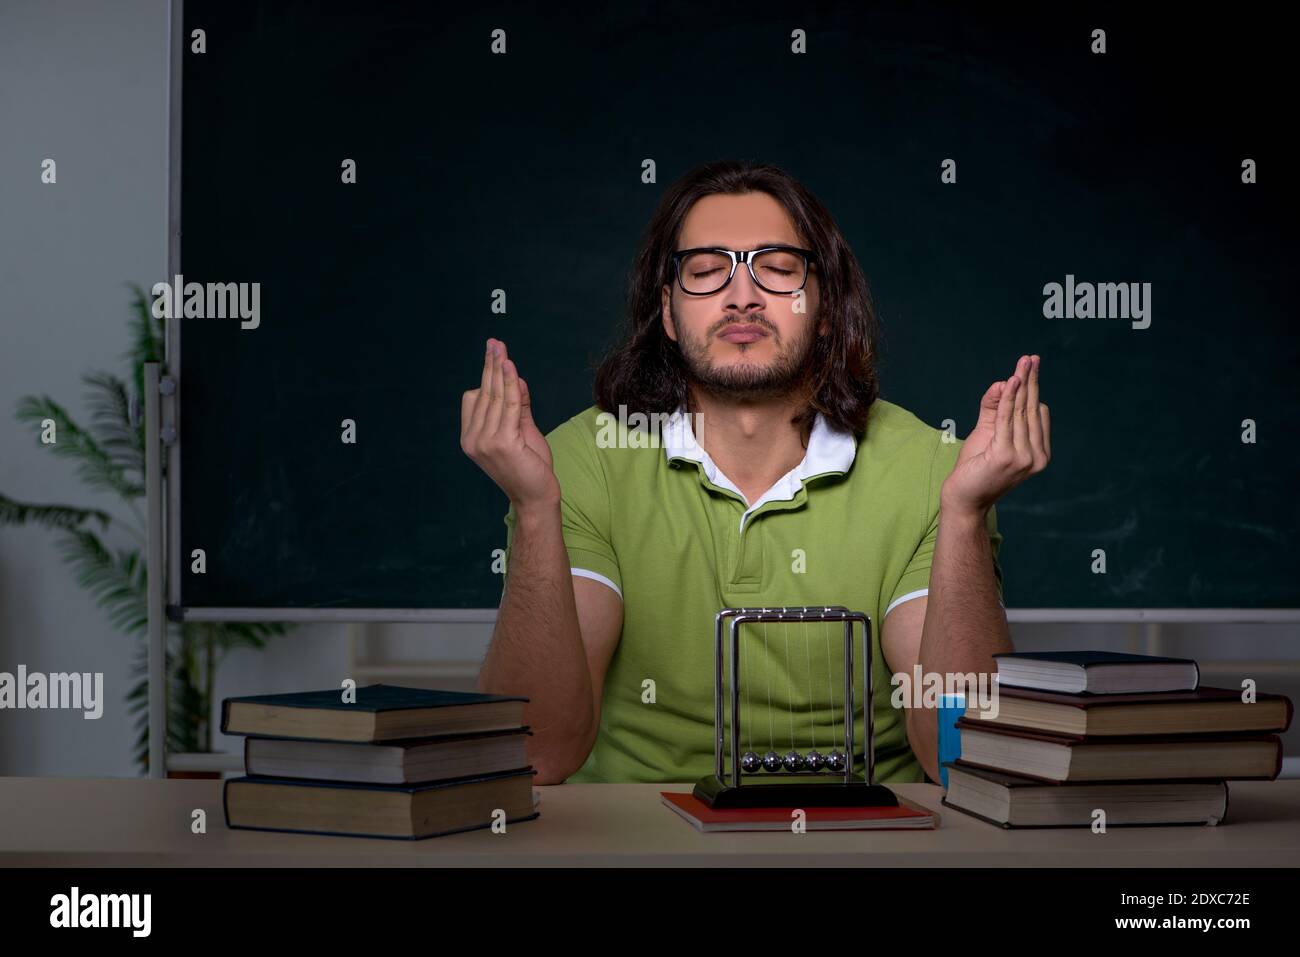 Male student preparing for exams in the classroom Stock Photo